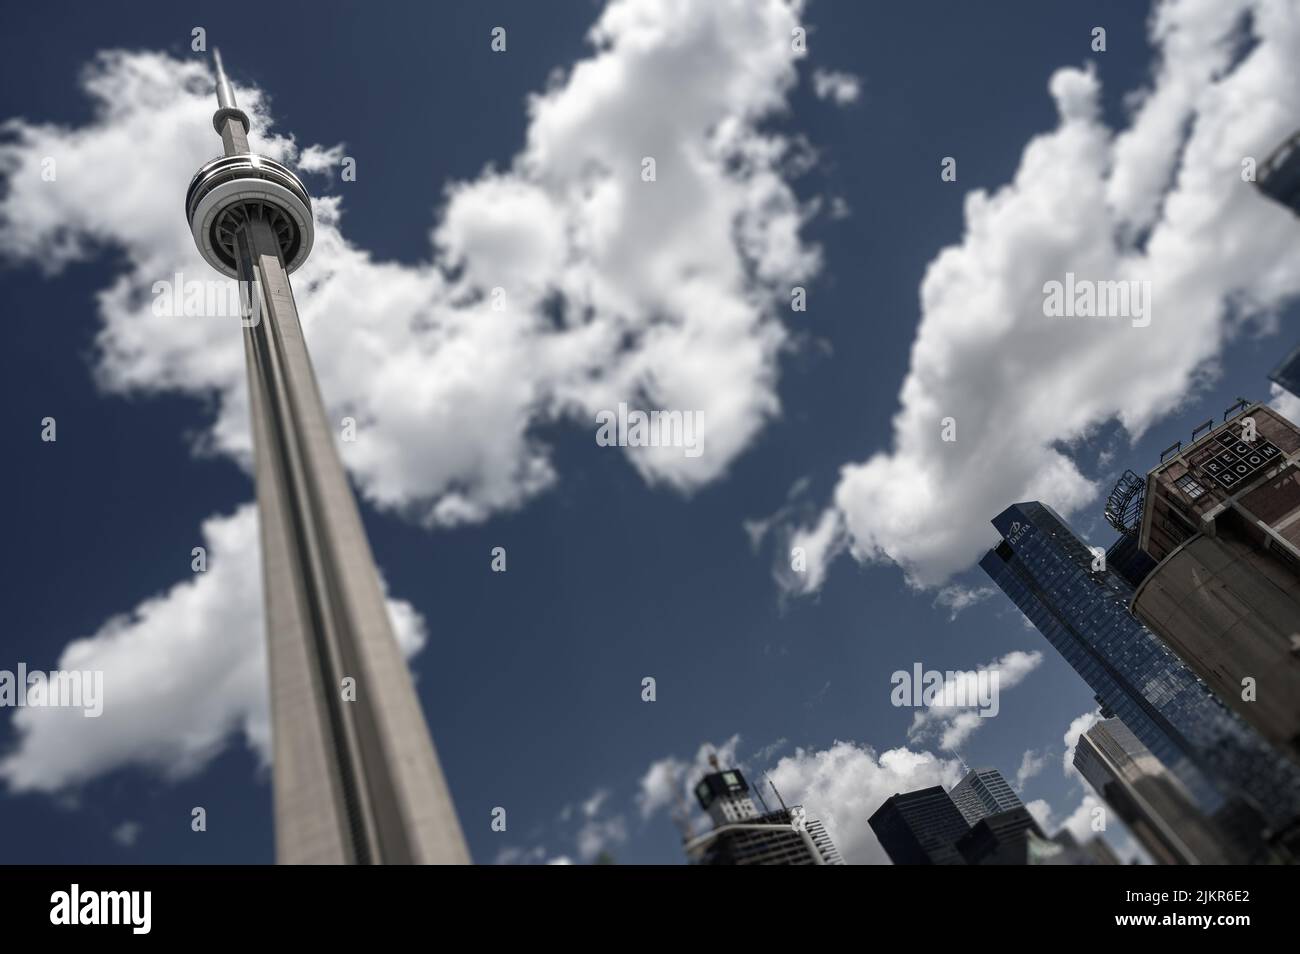 Looking up at the impressive CN Tower from ground level near Rogers Centre, Toronto, Ontario, Canada. Stock Photo